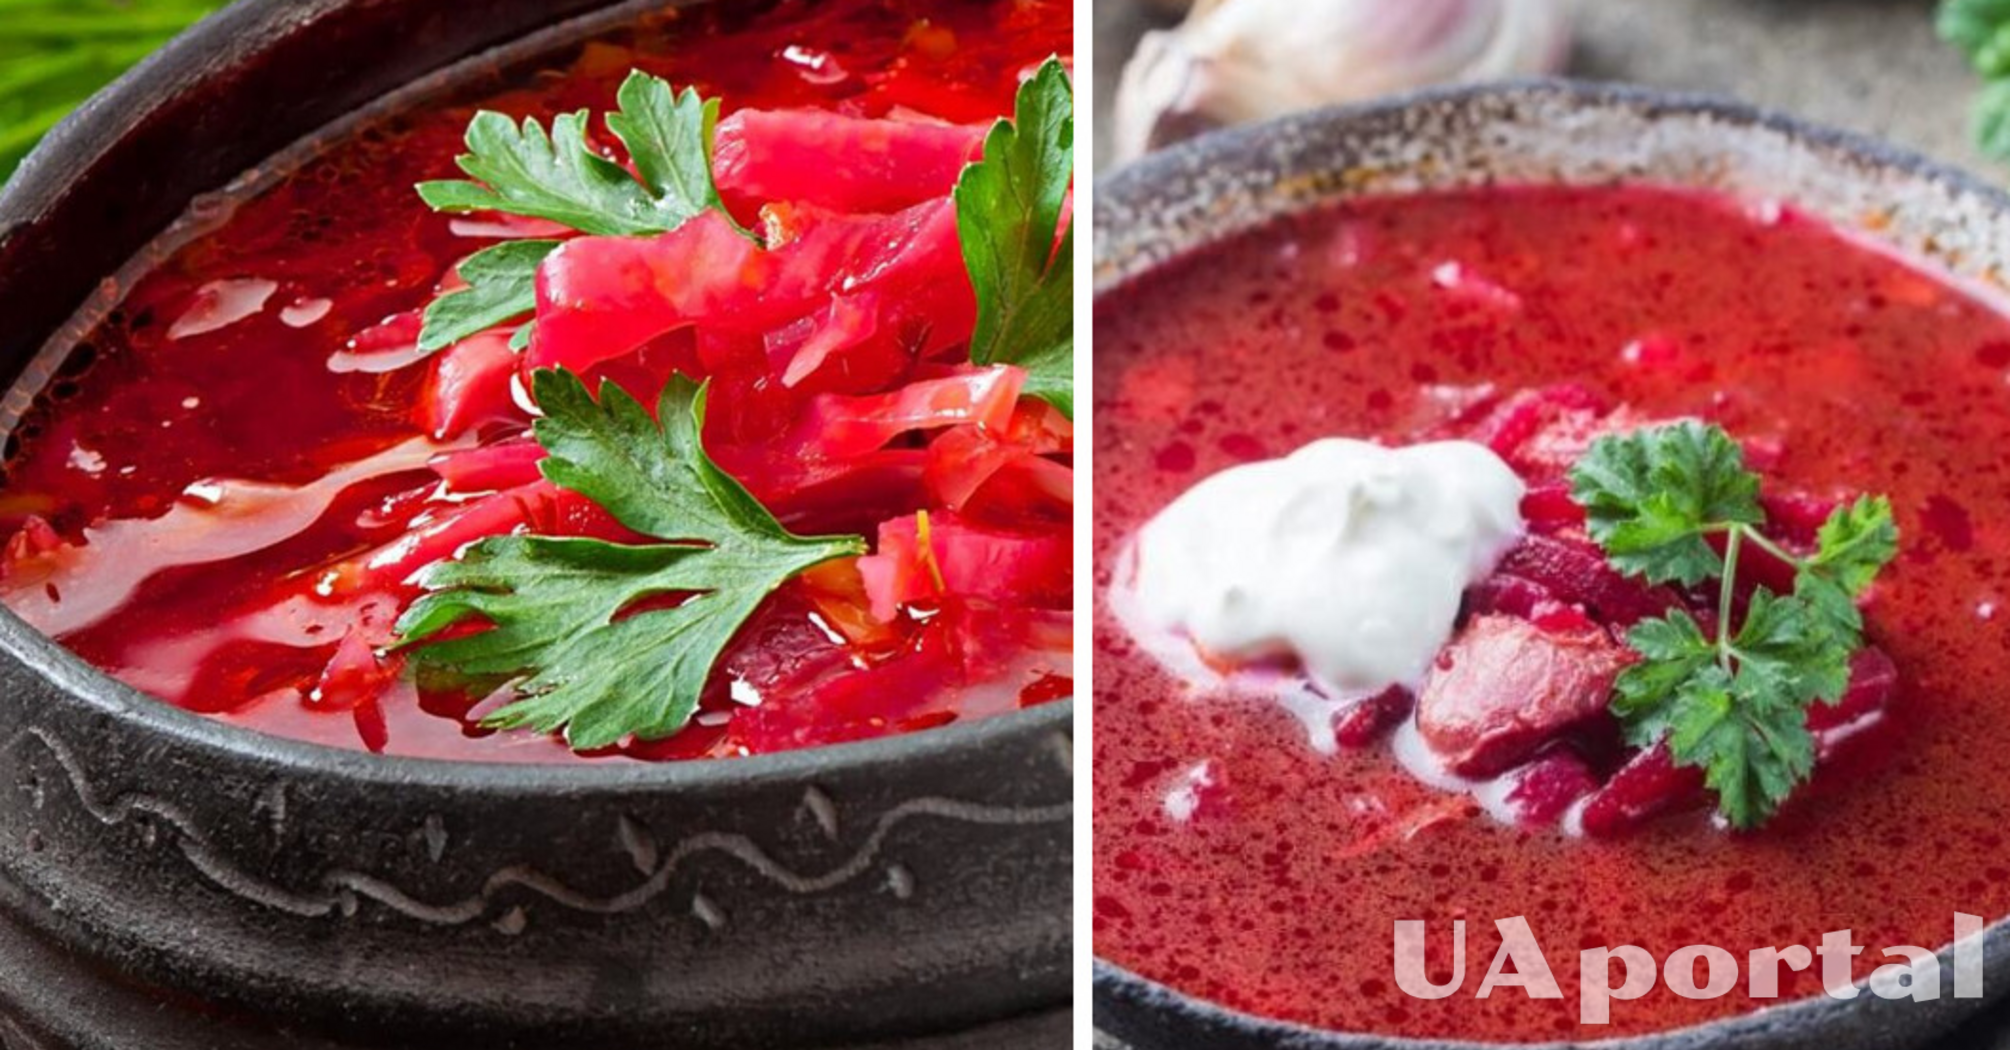 Spoil the taste: the main mistake in cooking borscht that few people know about